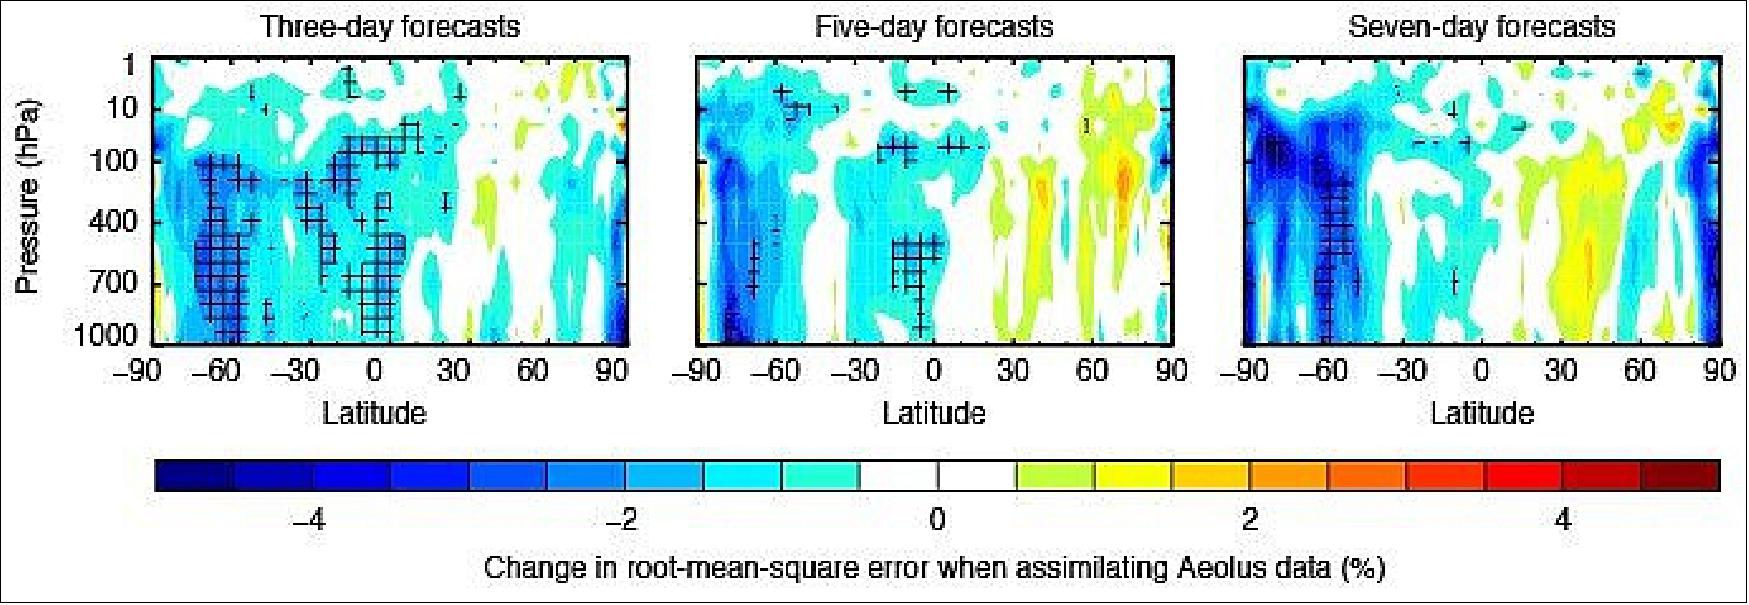 Figure 31: These plots show how the assimilation of Aeolus data reduces wind forecast errors (blue shading) in large parts of the southern hemisphere and the tropics throughout the troposphere and beyond (10 hPa corresponds to about 30 km altitude). In the northern hemisphere, forecasts improve mainly in the polar region. Cross-hatching indicates statistical significance at the 95% level. The experiment covers the period from 2 August to 18 October 2019 (image credit: ESA/ECMWF)